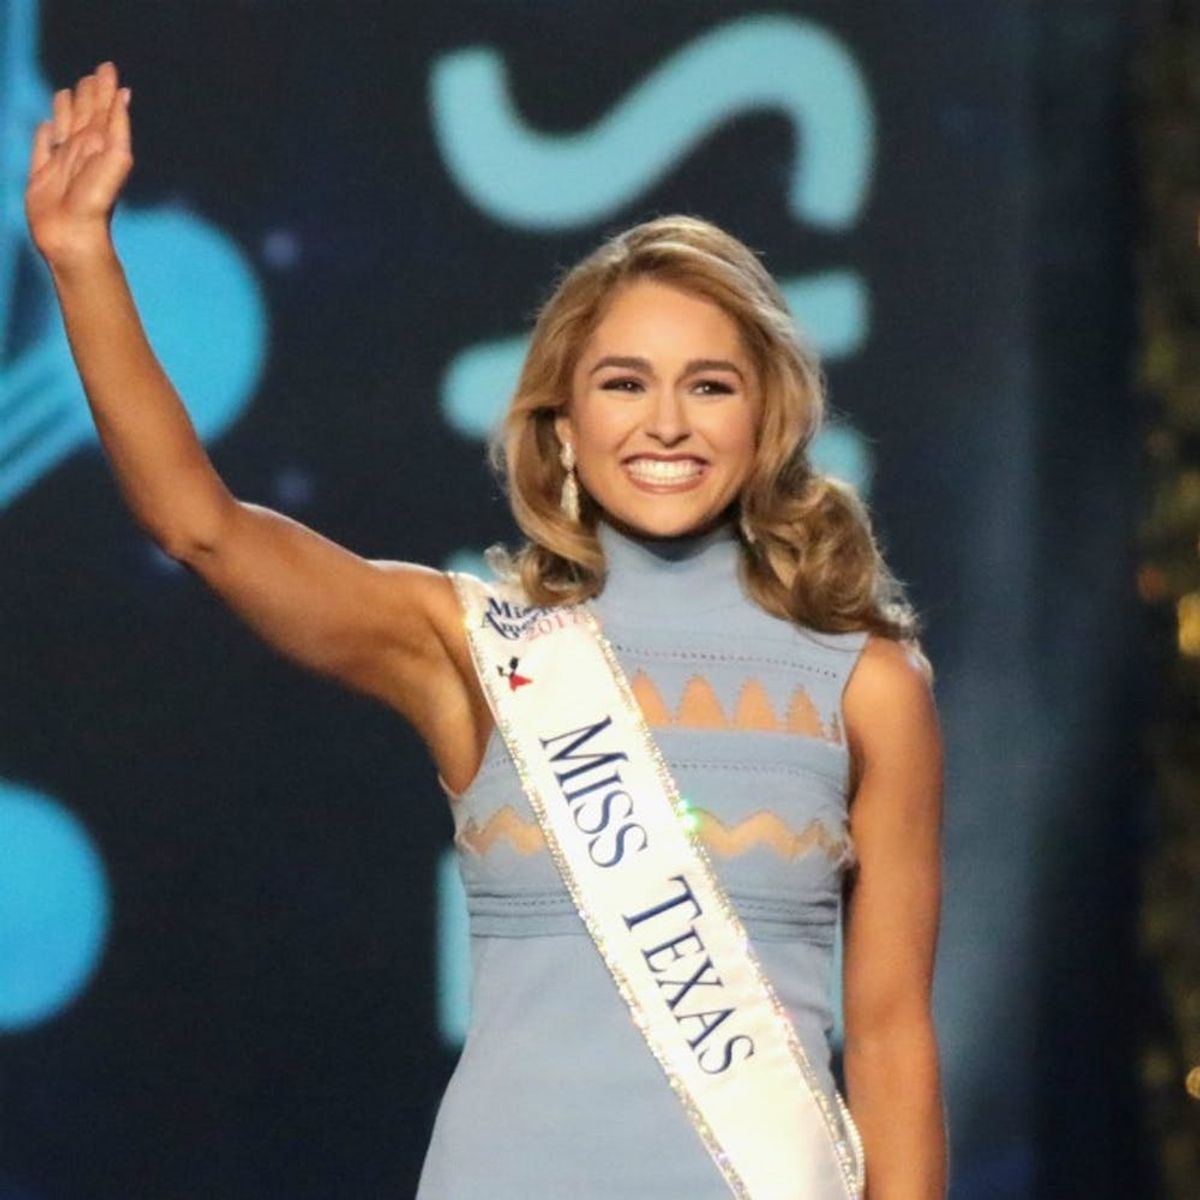 Miss Texas Handled a Question About Racism More Eloquently Than Most